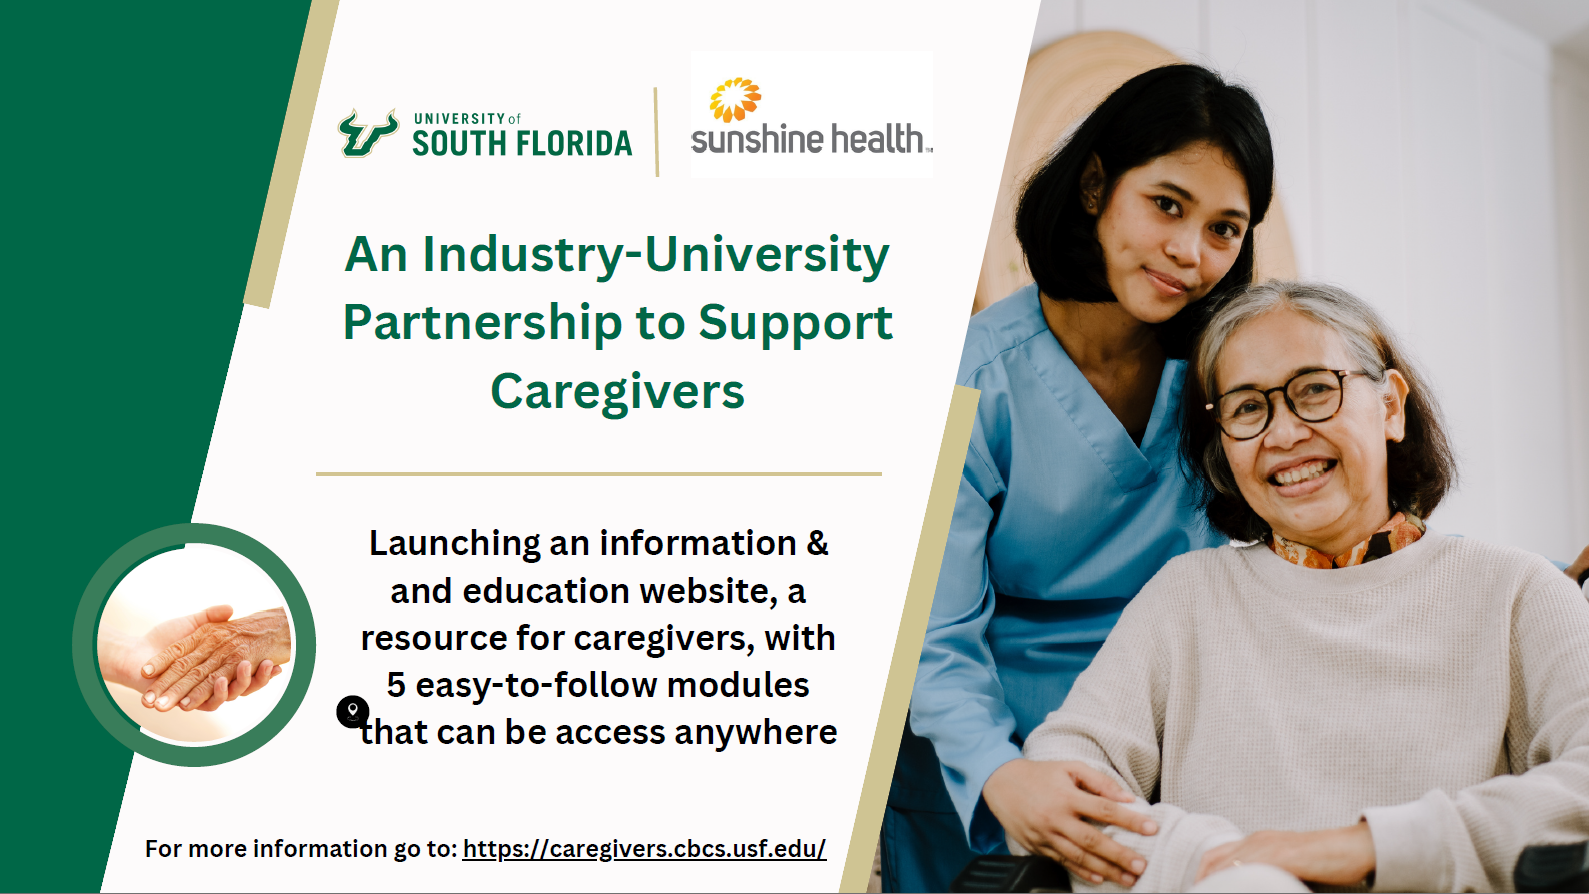 An Industry-University Partnership to Support Caregivers